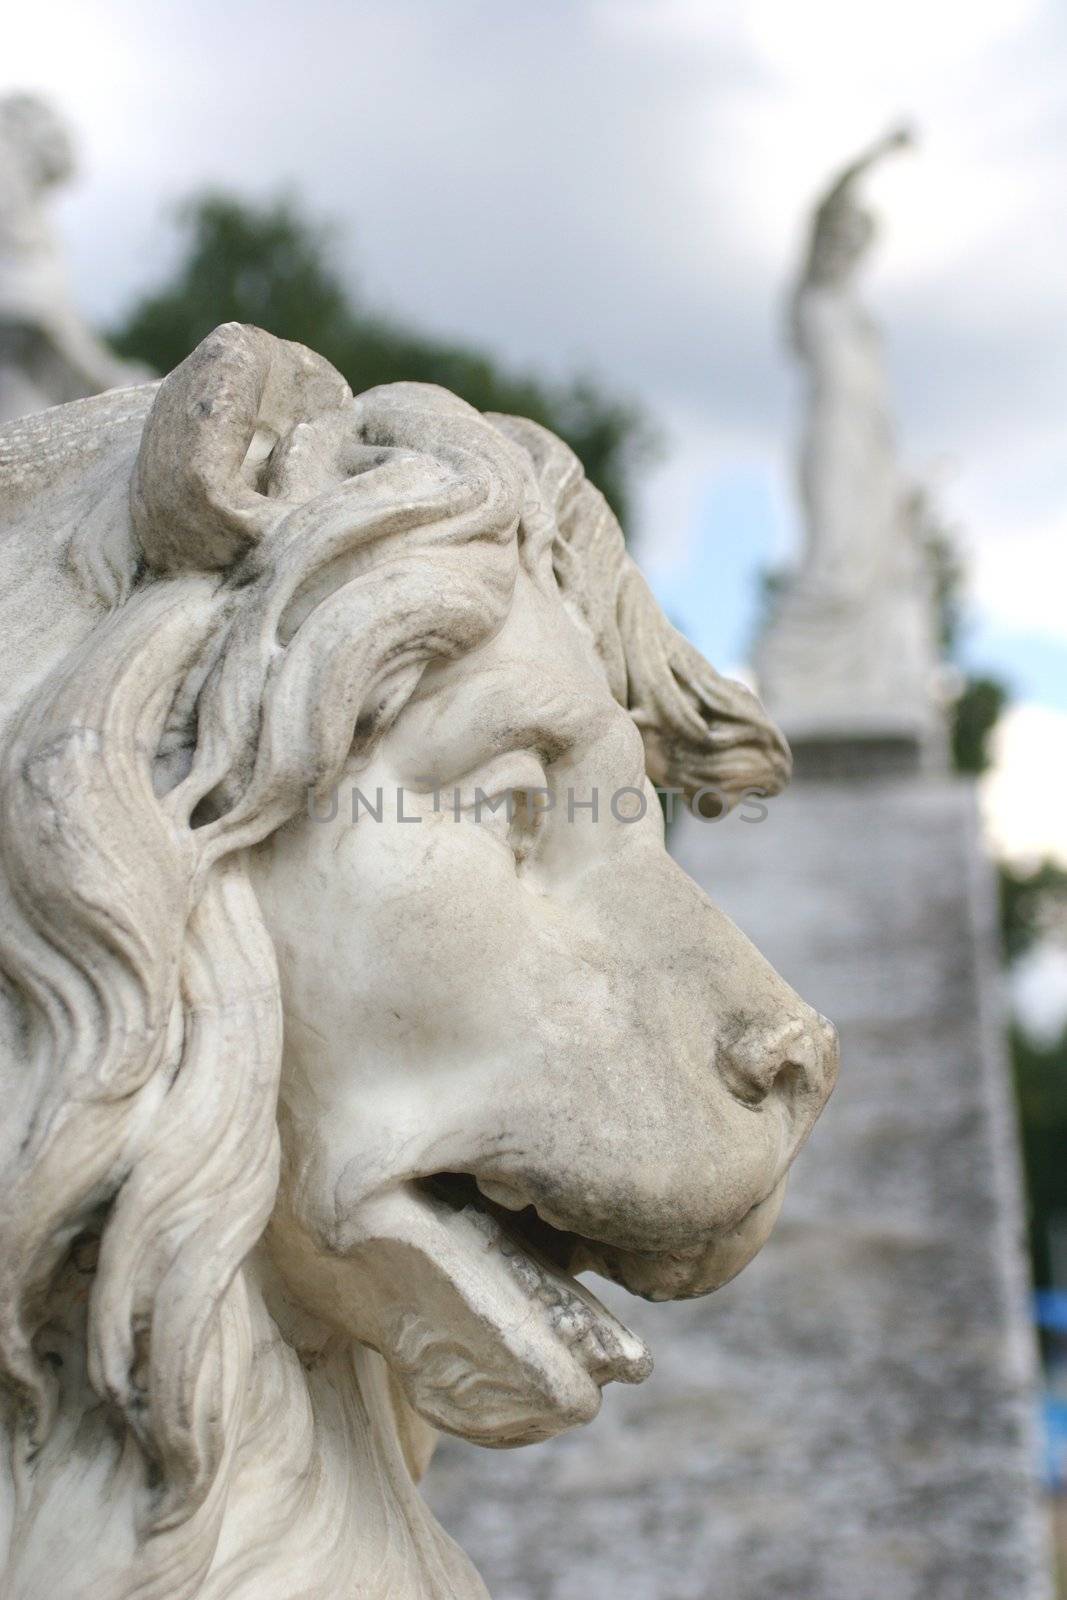 Antique Sculpture, Head of the Lion by Astroid